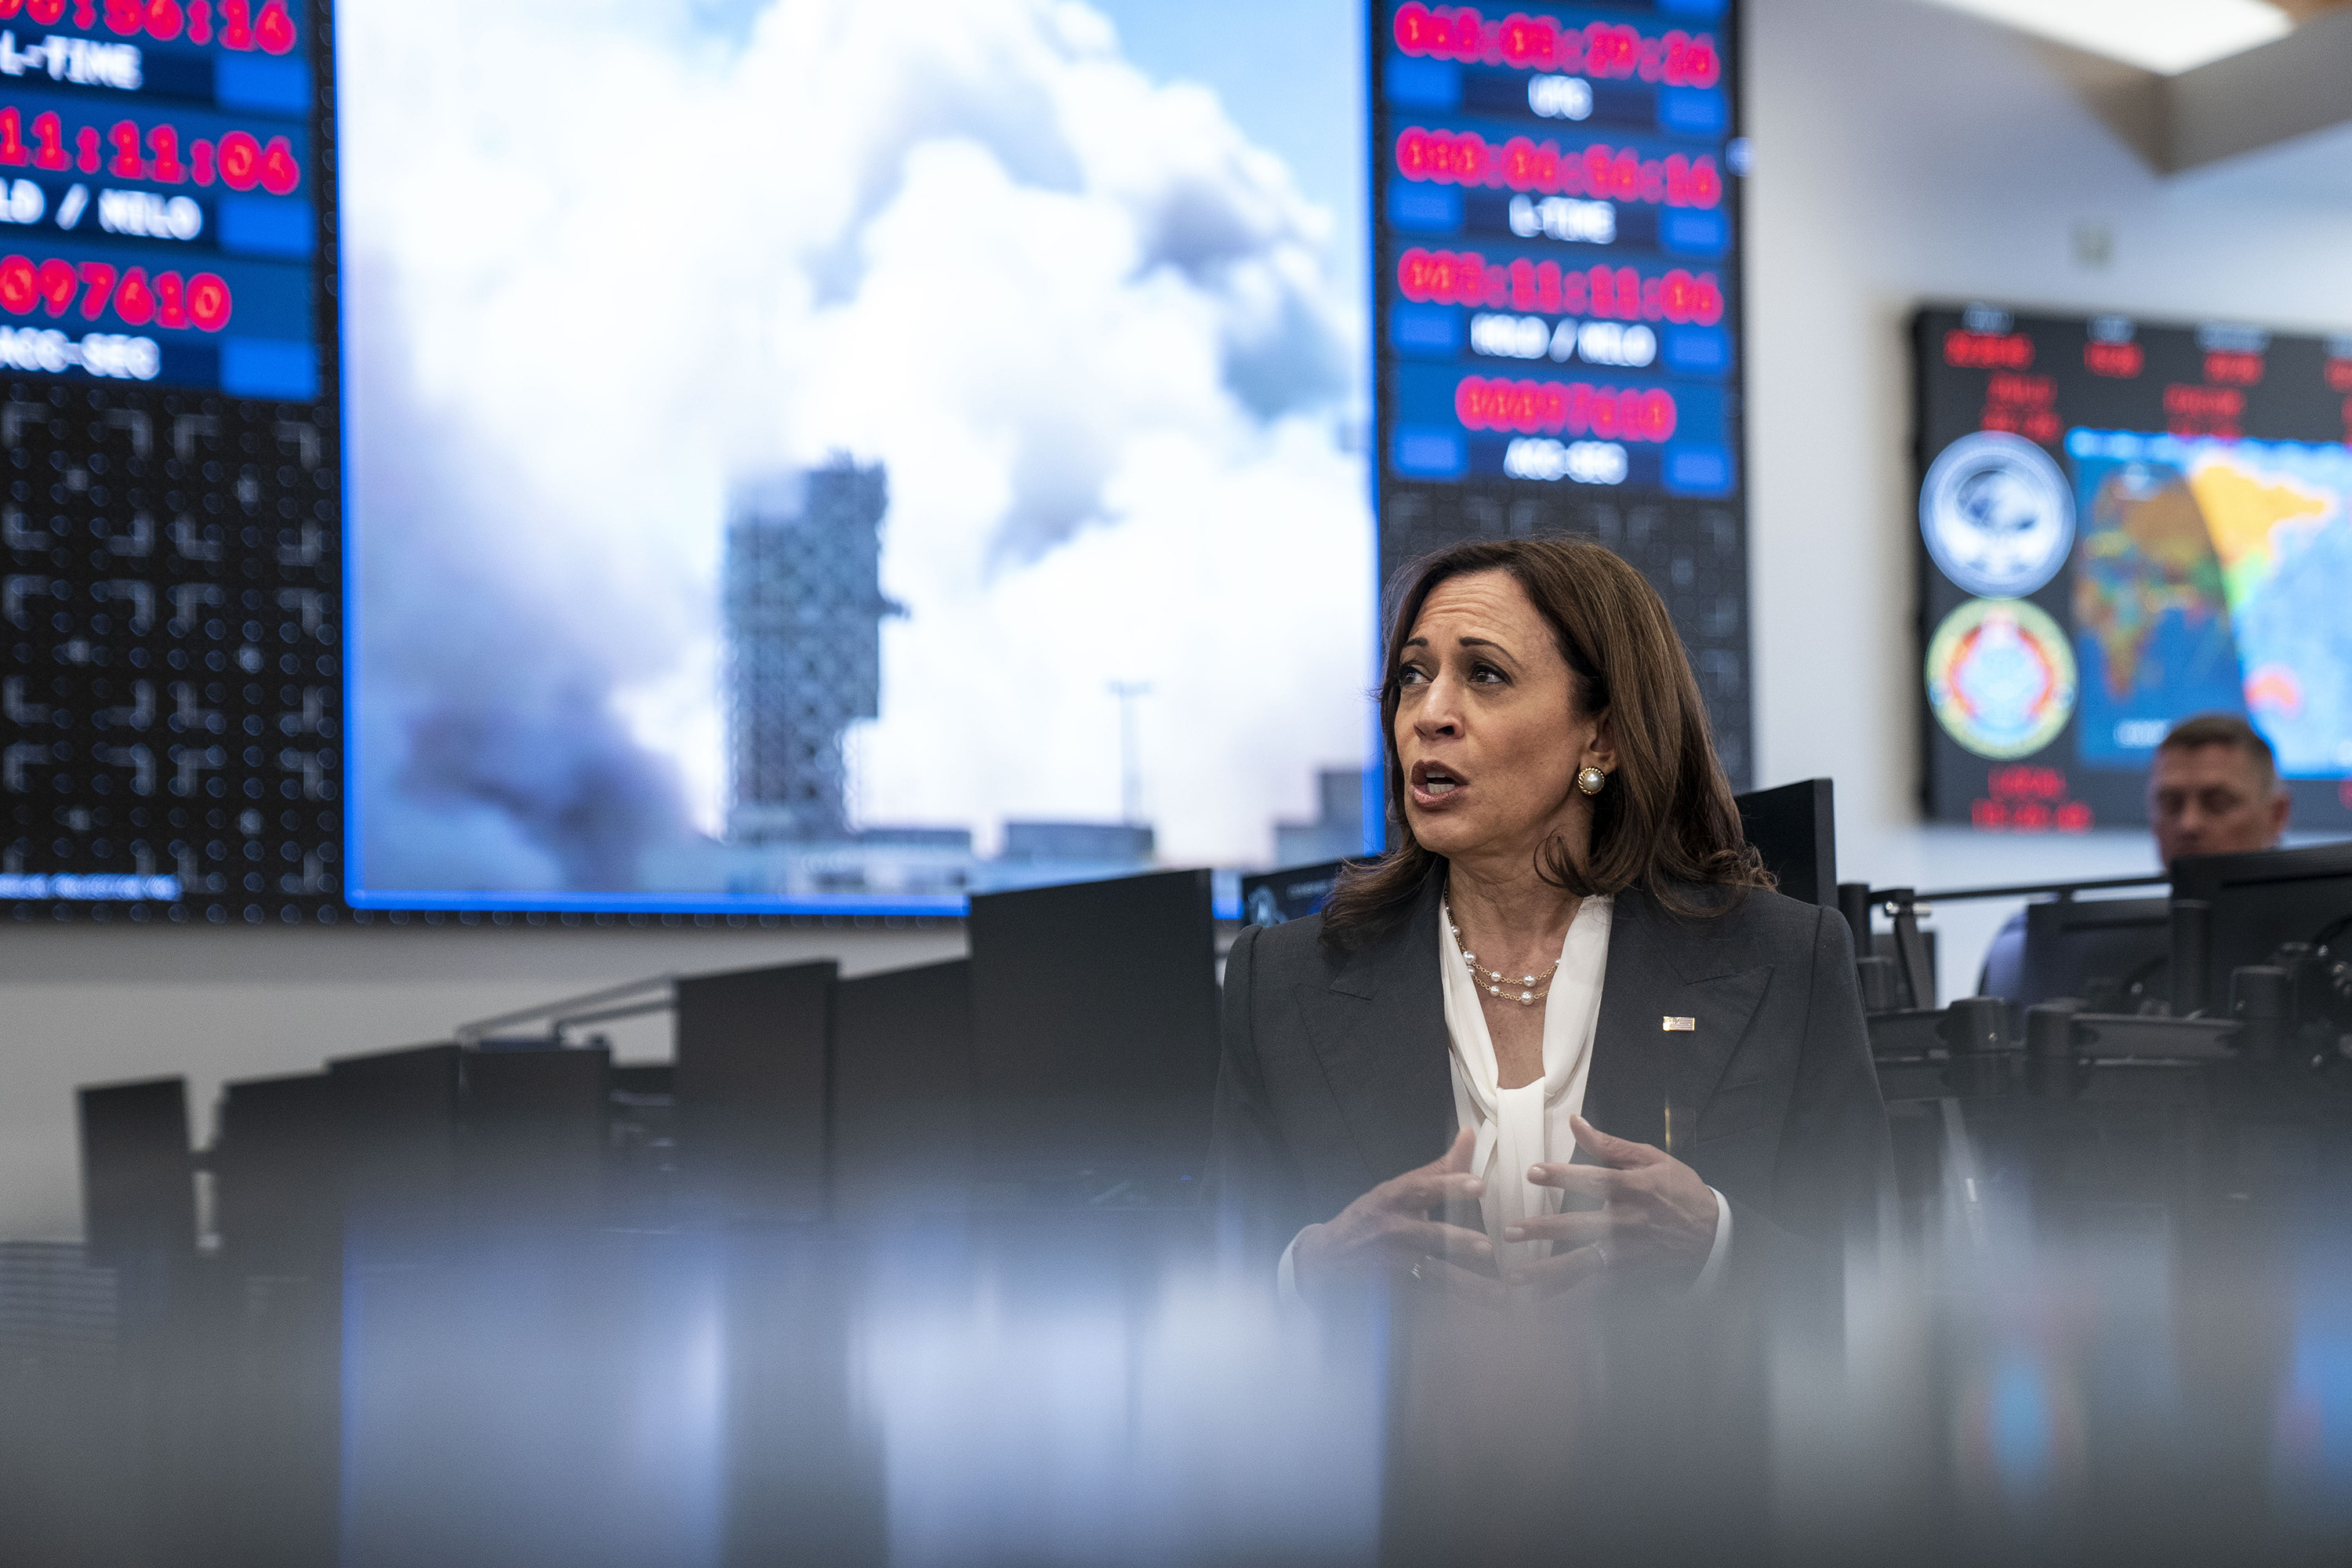 US Vice-President Kamala Harris announced a plan last month to introduce a UN resolution banning anti-satellite missile tests that create space debris. Photo: TNS